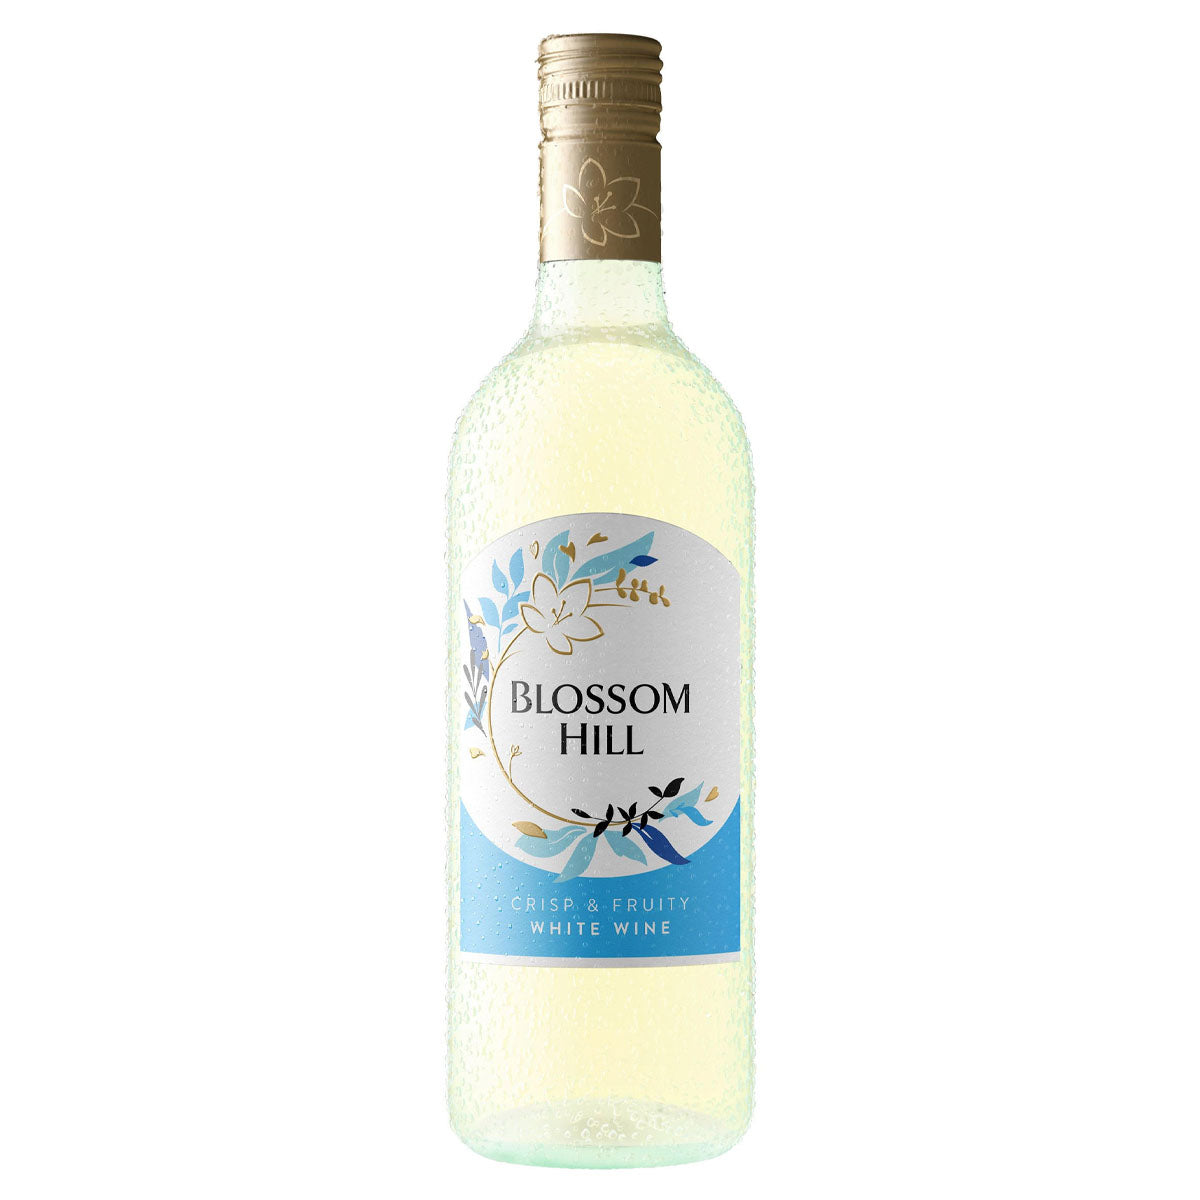 A bottle of Blossom Hill - White Wine (10.5% ABV) - 750ml on a white background.